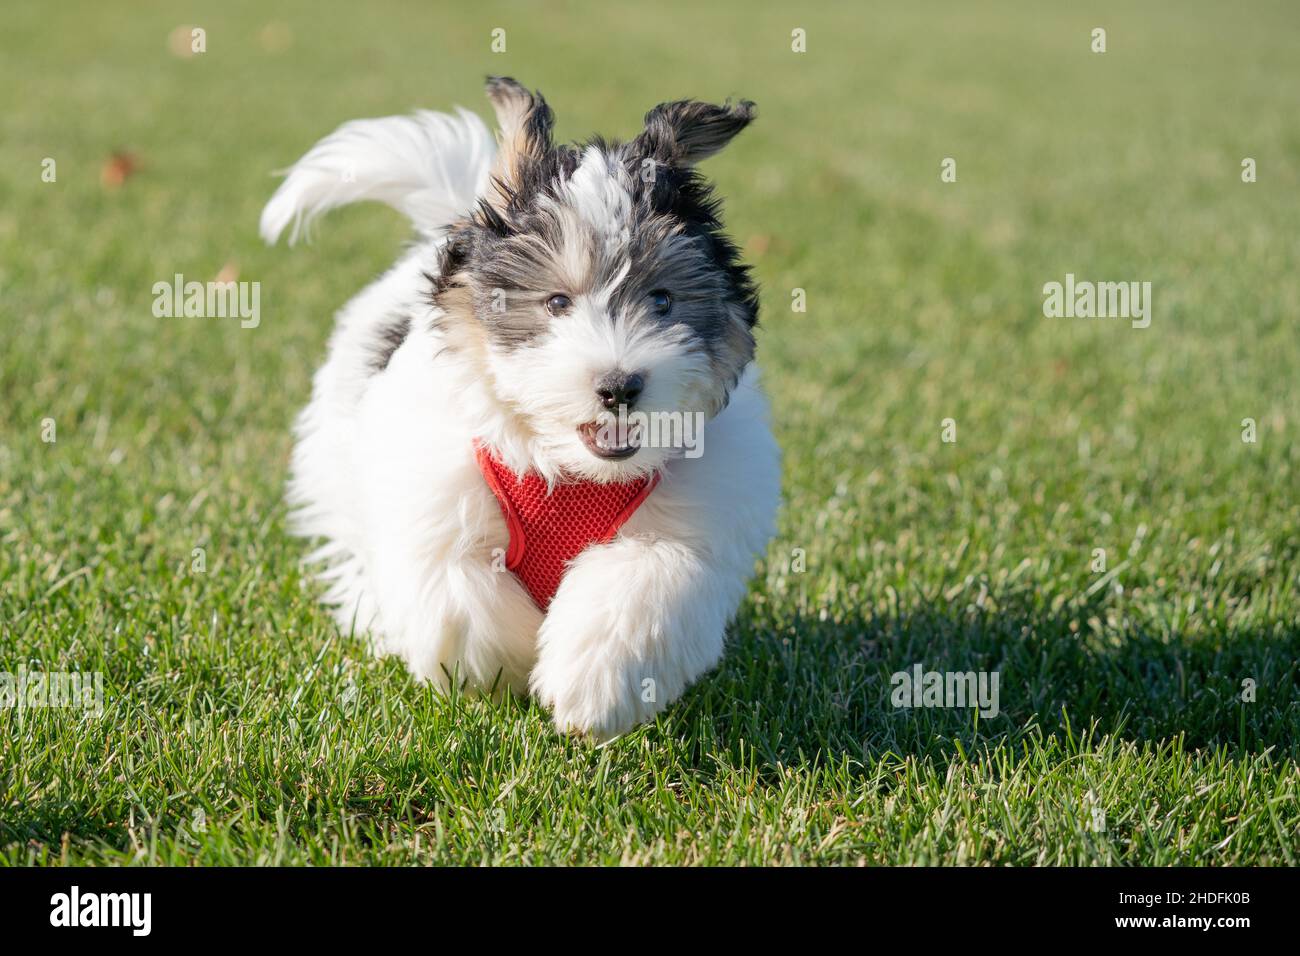 Adorable black and white havanese puppy running. Stock Photo